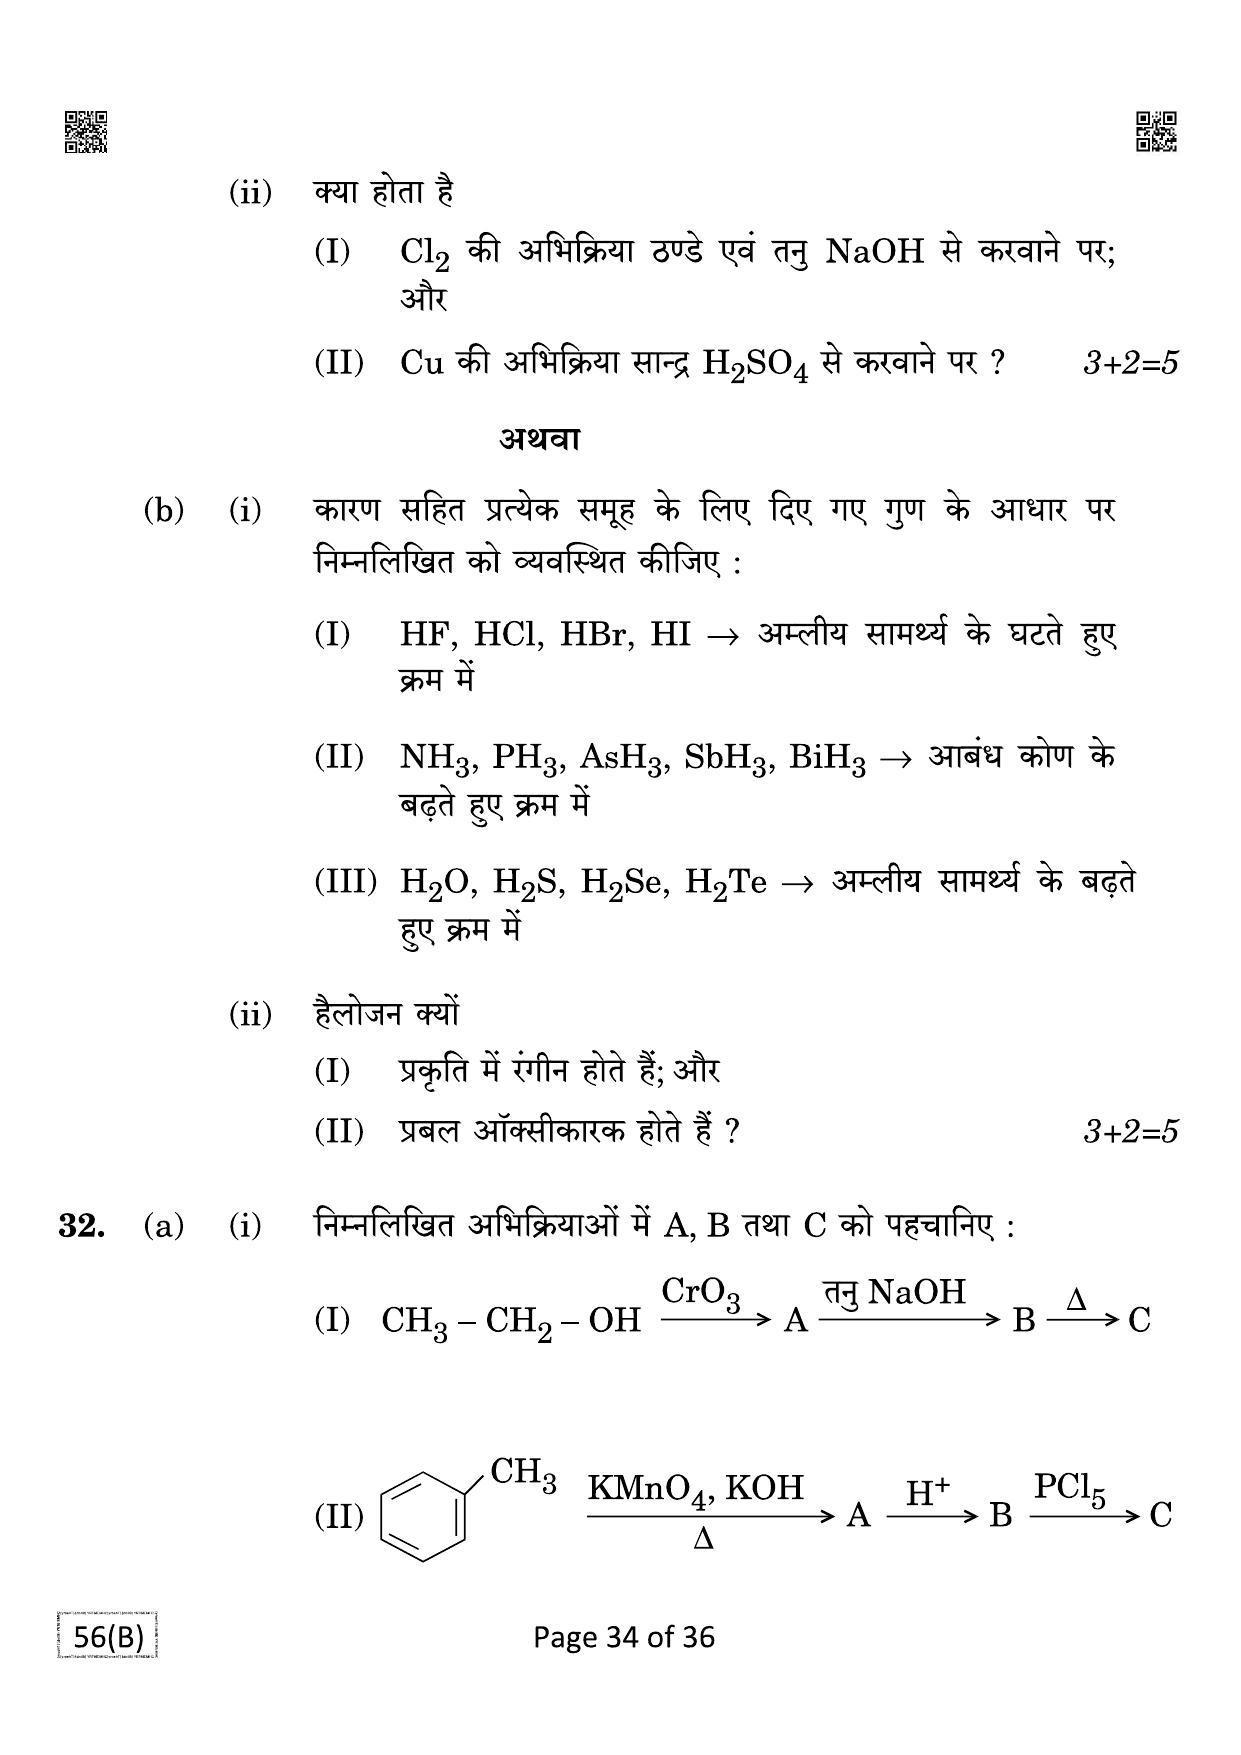 CBSE Class 12 QP_043_CHEMISTRY_FOR_BLIND_CANDIDATES 2021 Compartment Question Paper - Page 34